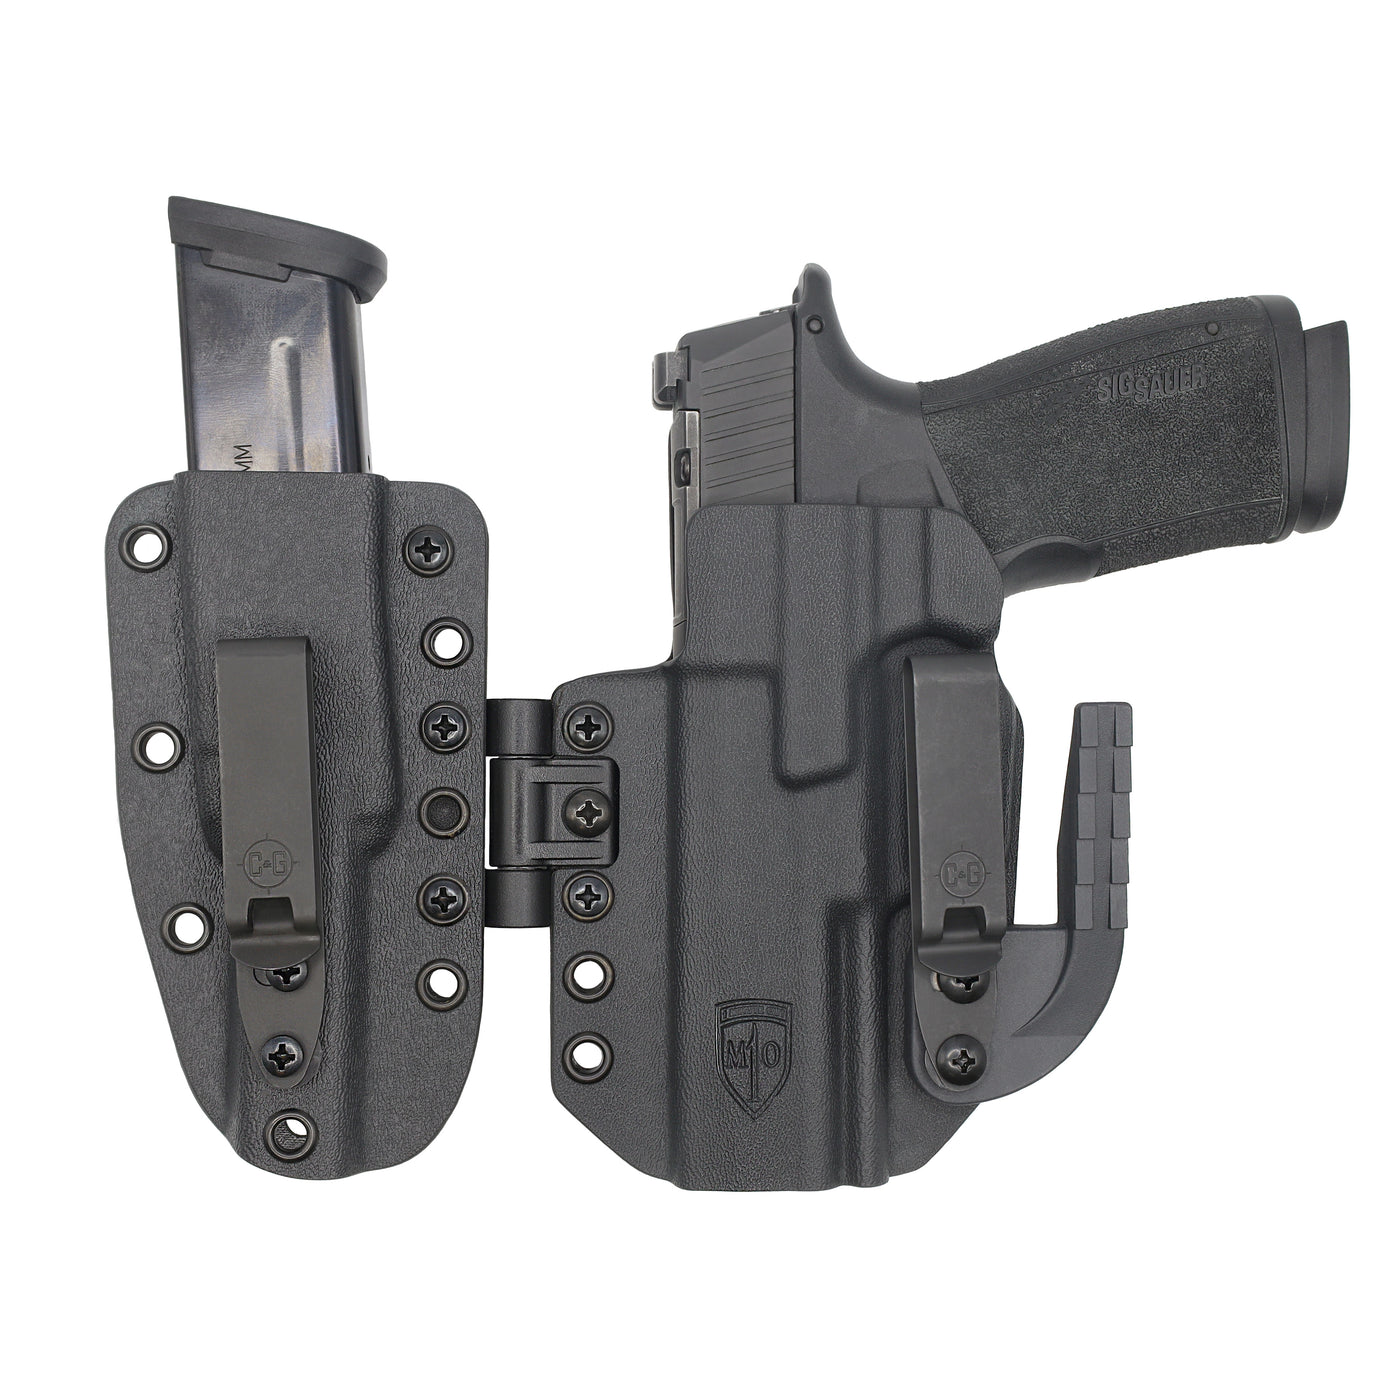 C&G Holsters quickship MOD1 P365-XMACRO holstered LEFT HAND